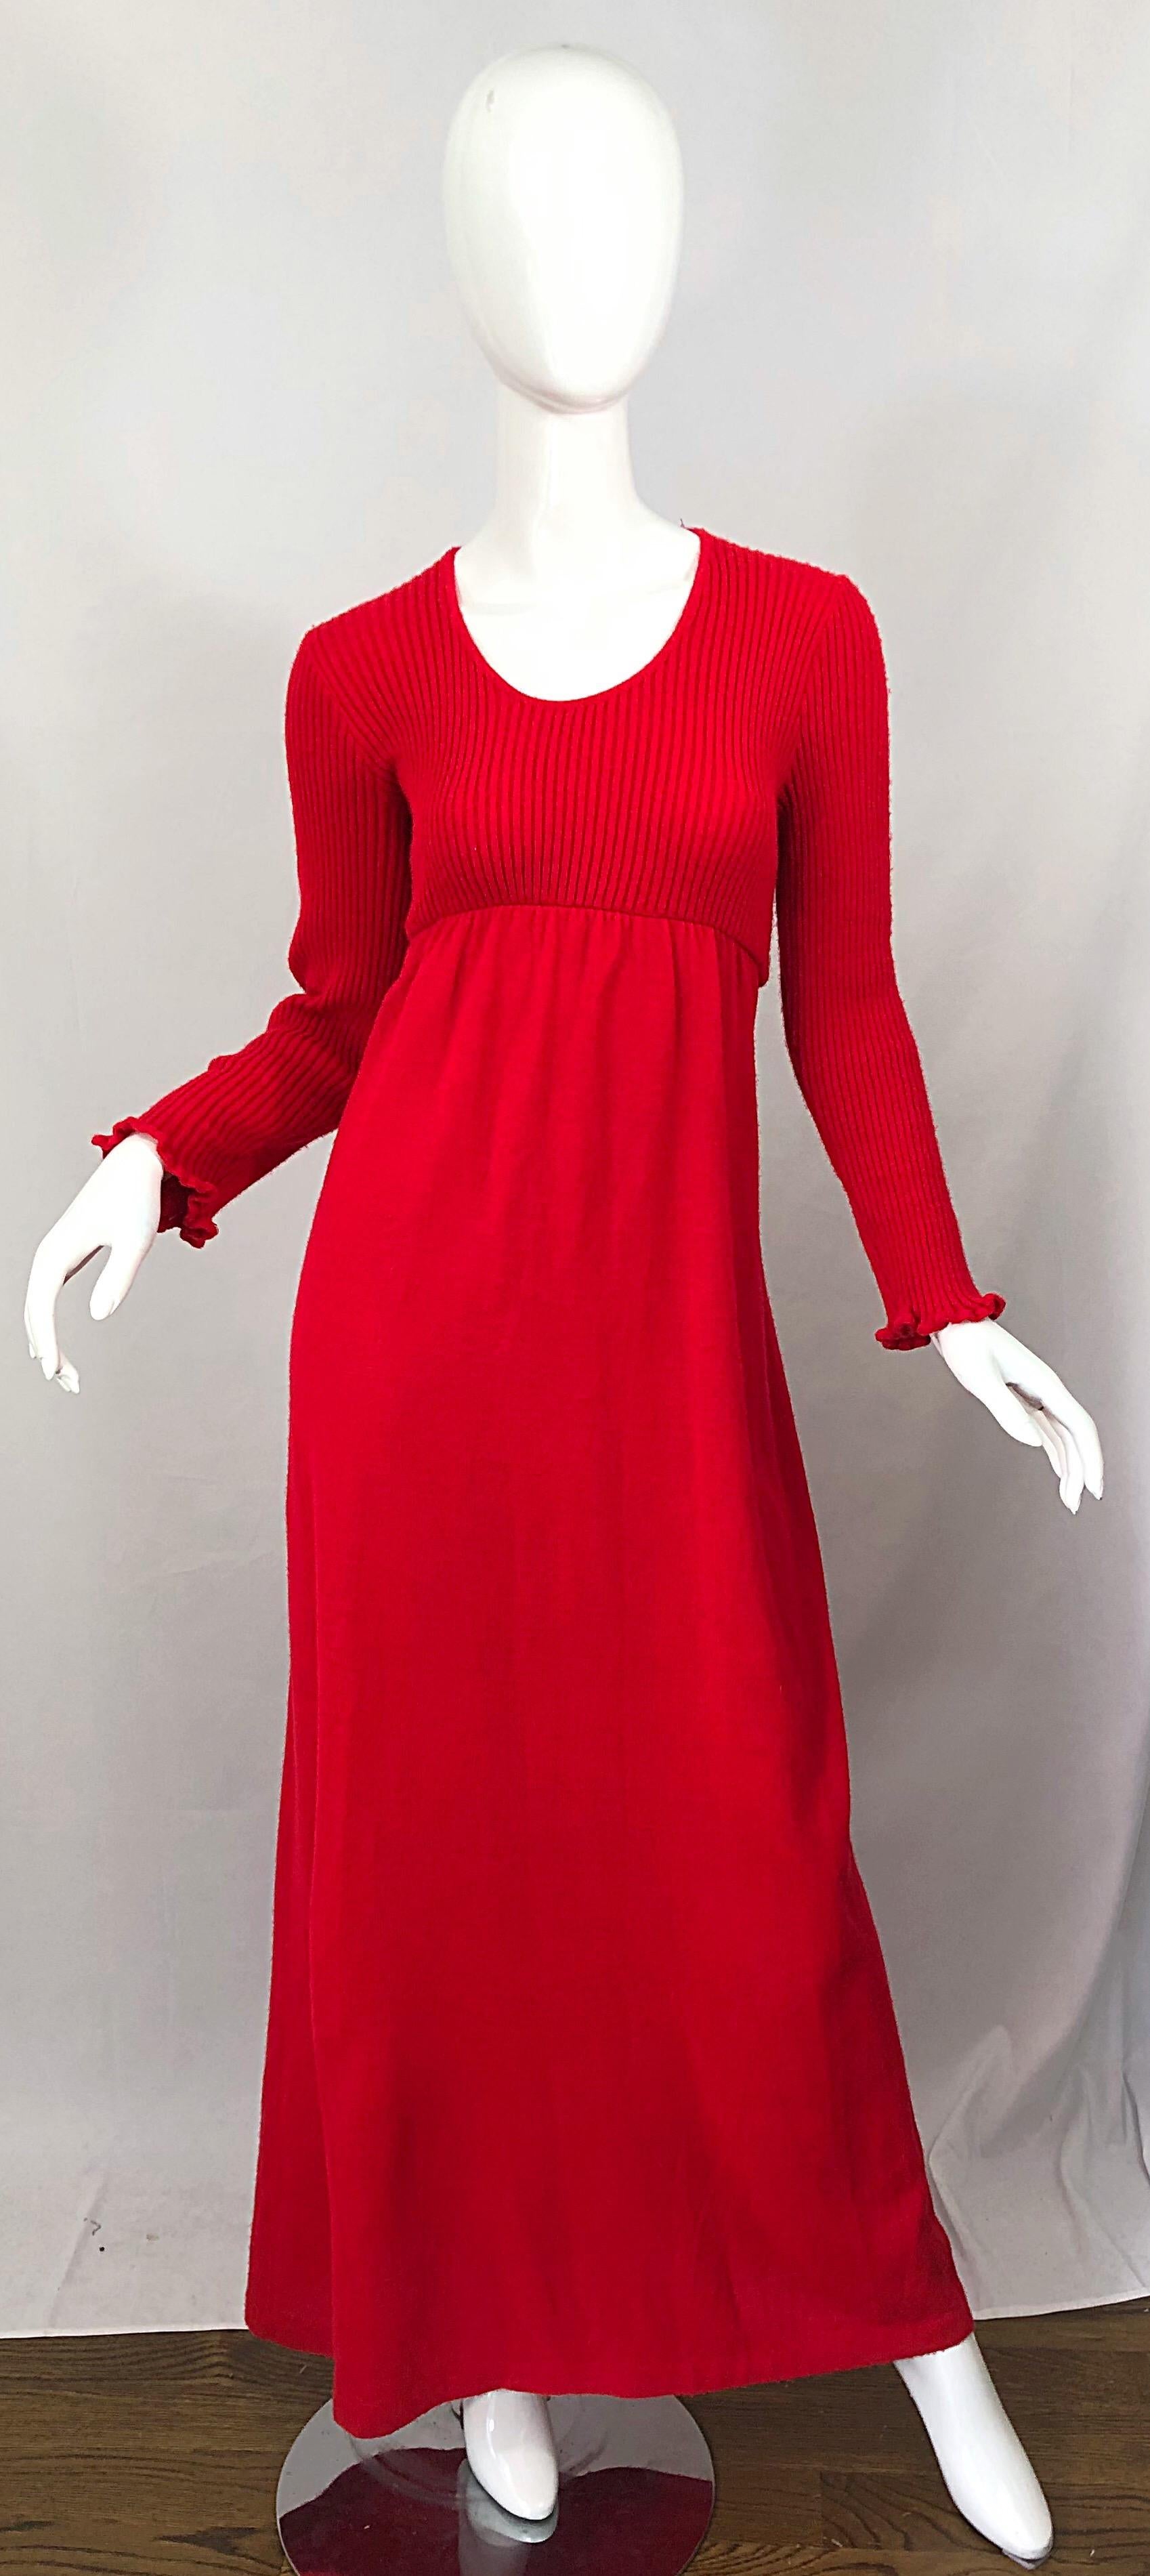 Chic vintage JOSEPH MAGNIN lipstick red long sleeve wool sweater dress! Features a soft wool knit that has plenty of stretch. Vibrant lipstick red color is the perfect alternative to black. Flattering tailored scoop neck bodice with an empire like